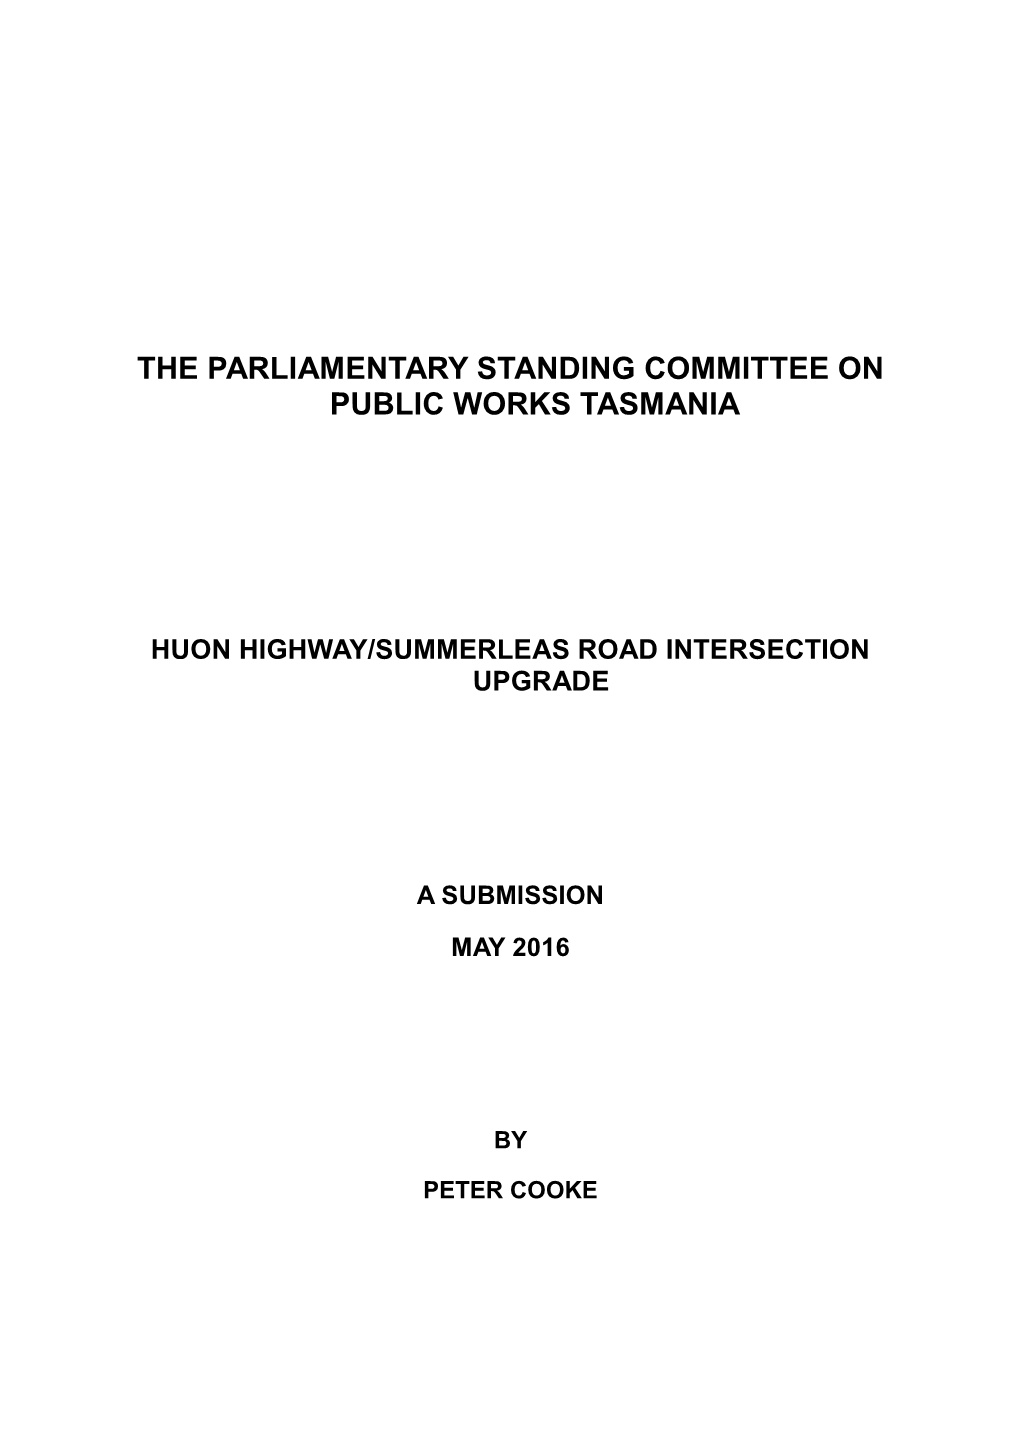 The Parliamentary Standing Committee on Public Works Tasmania